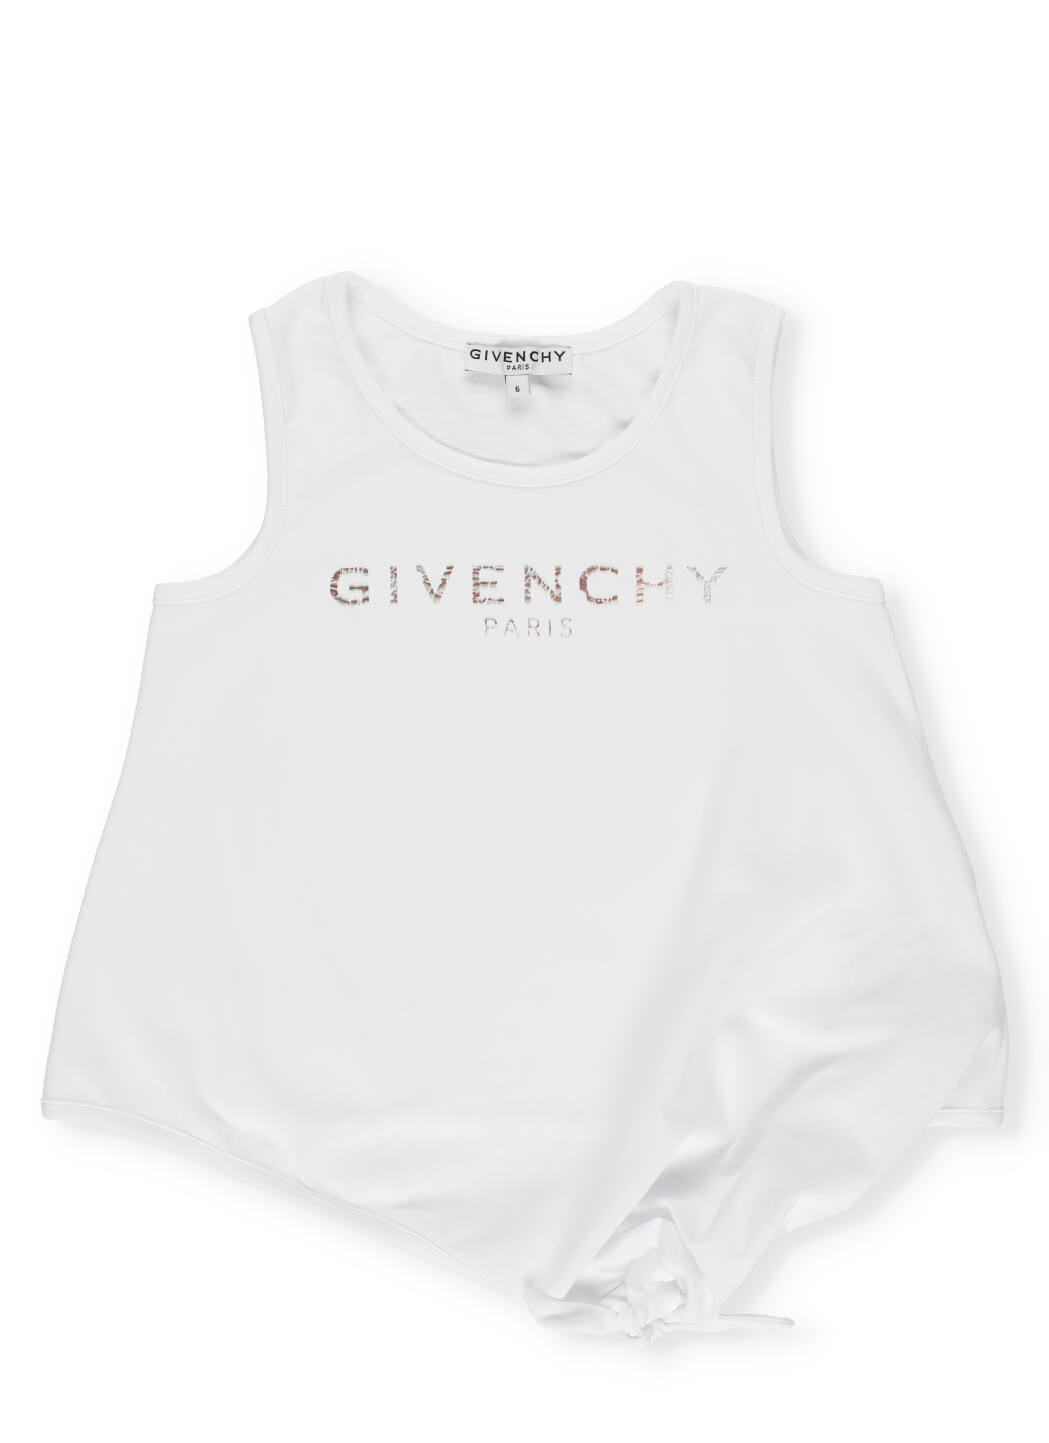 Givenchy Cotton Blend Top